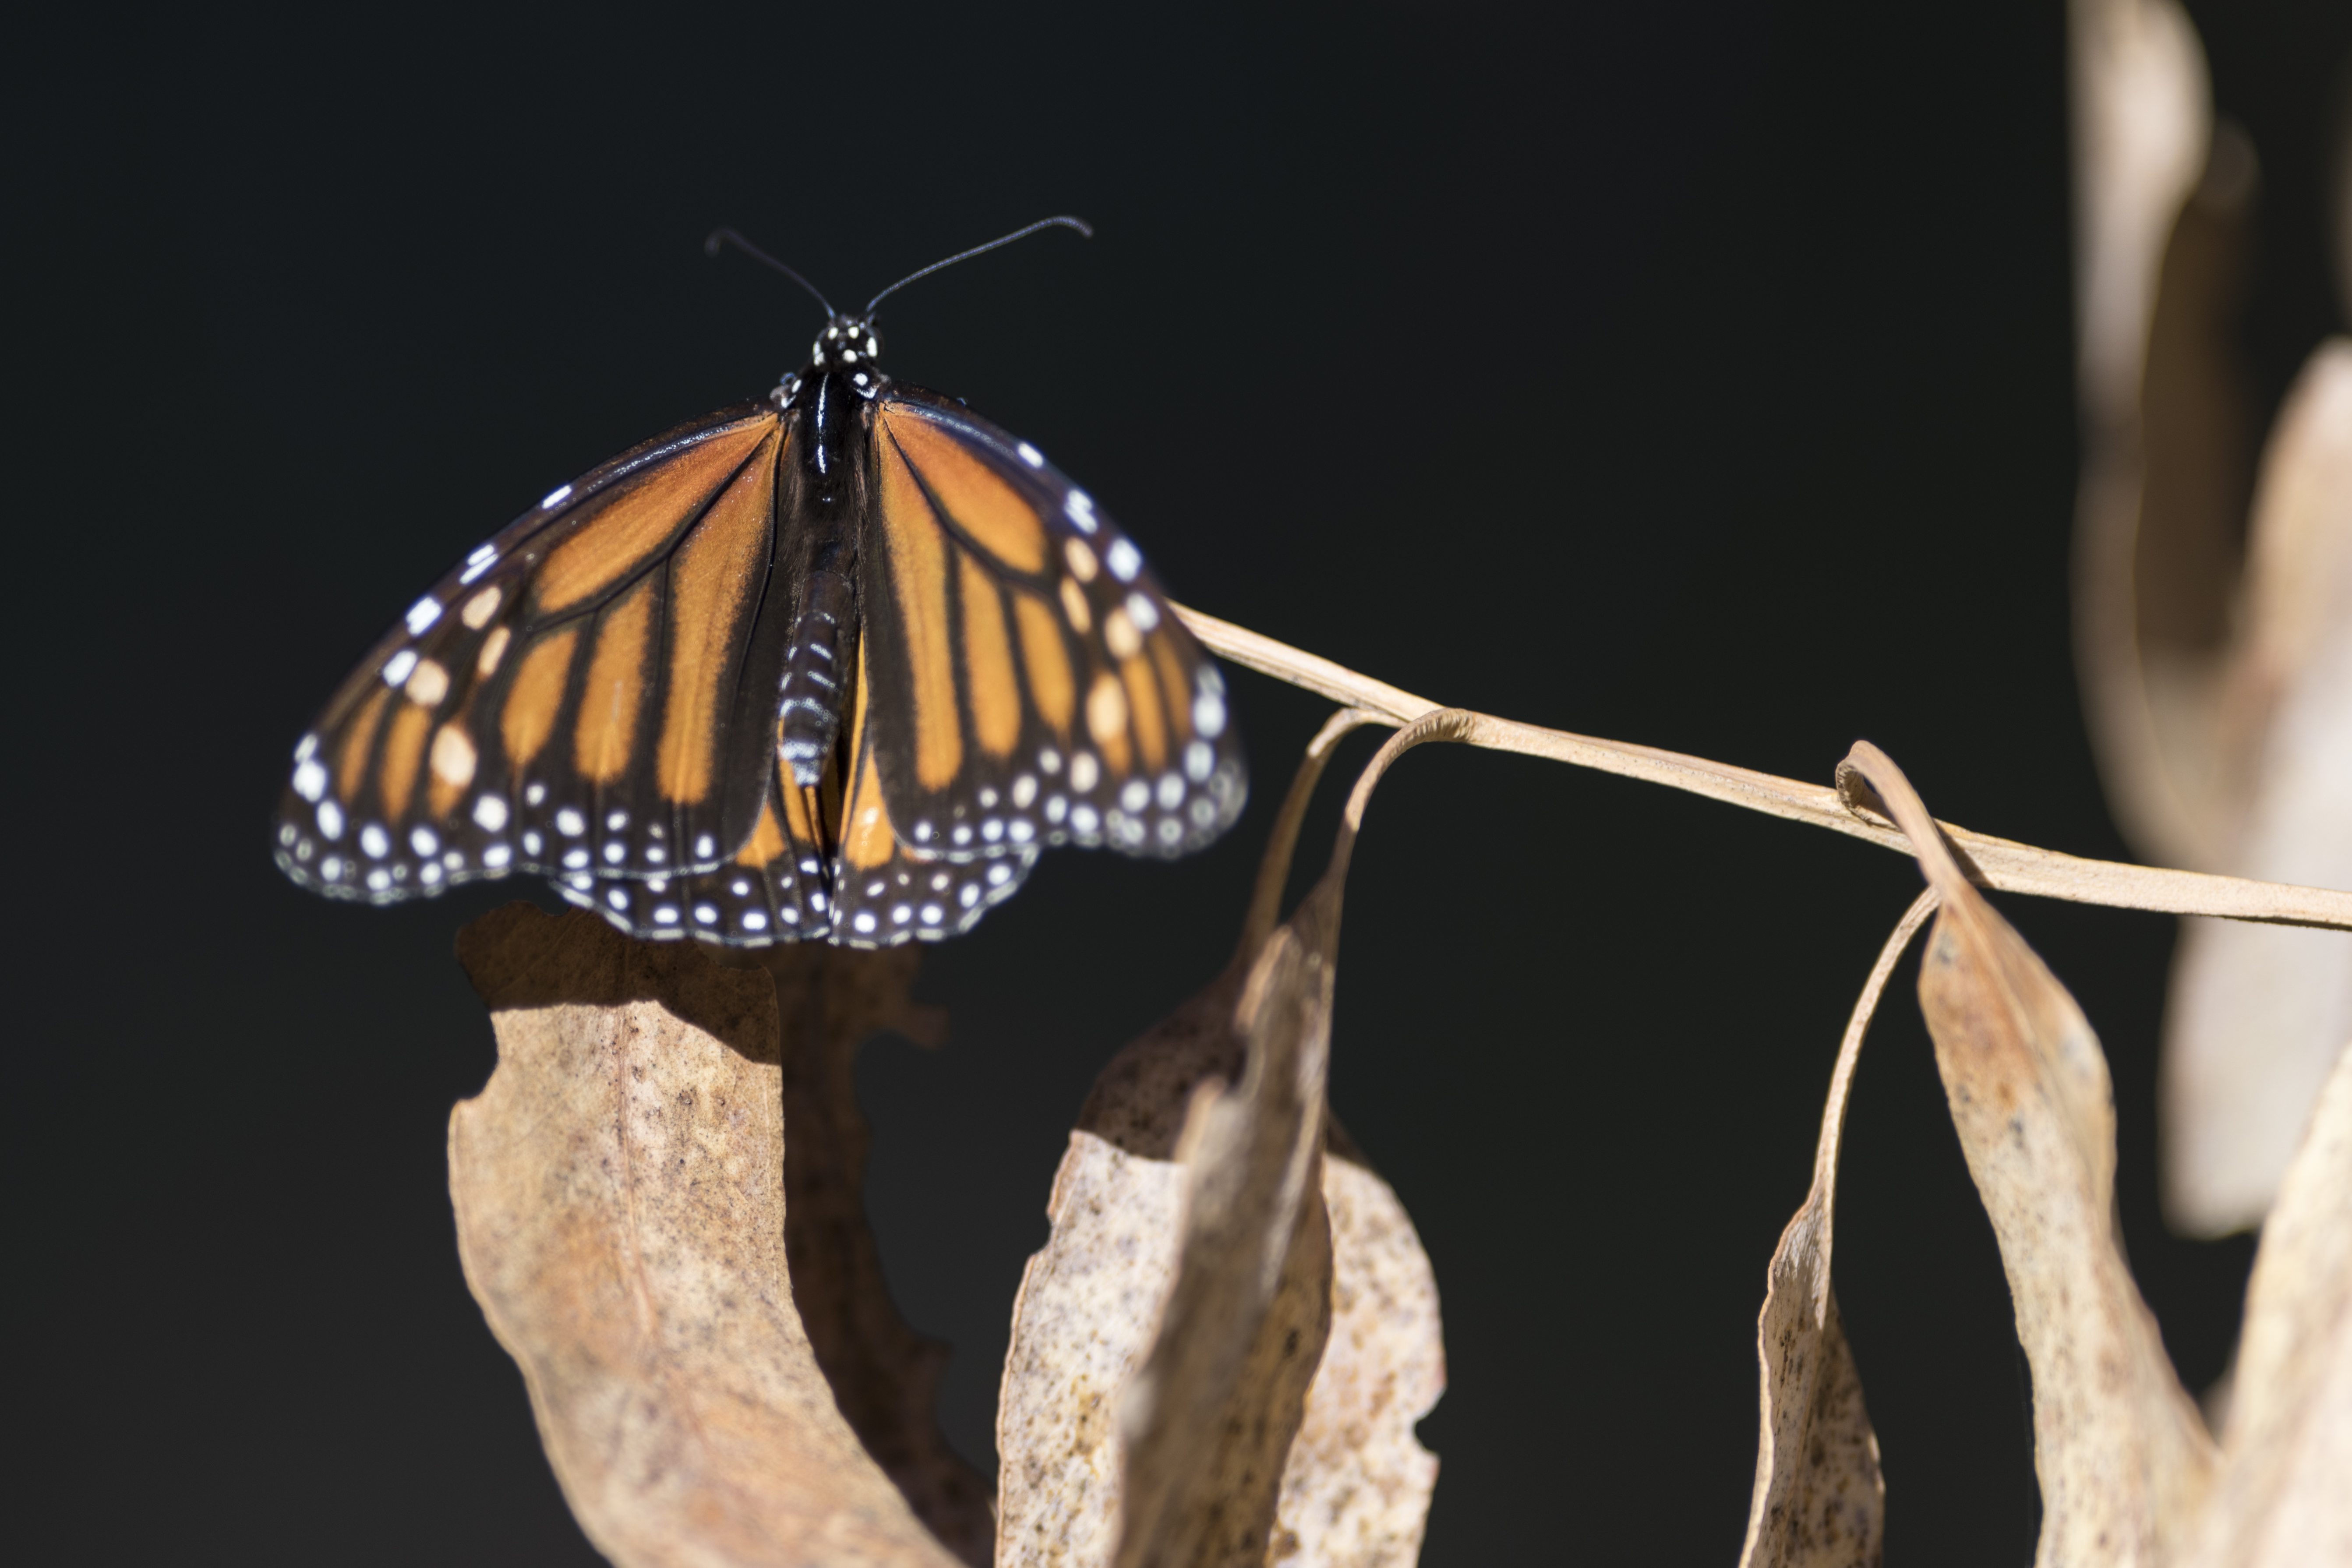 Monarch butterflies in California at critically low level for 2nd